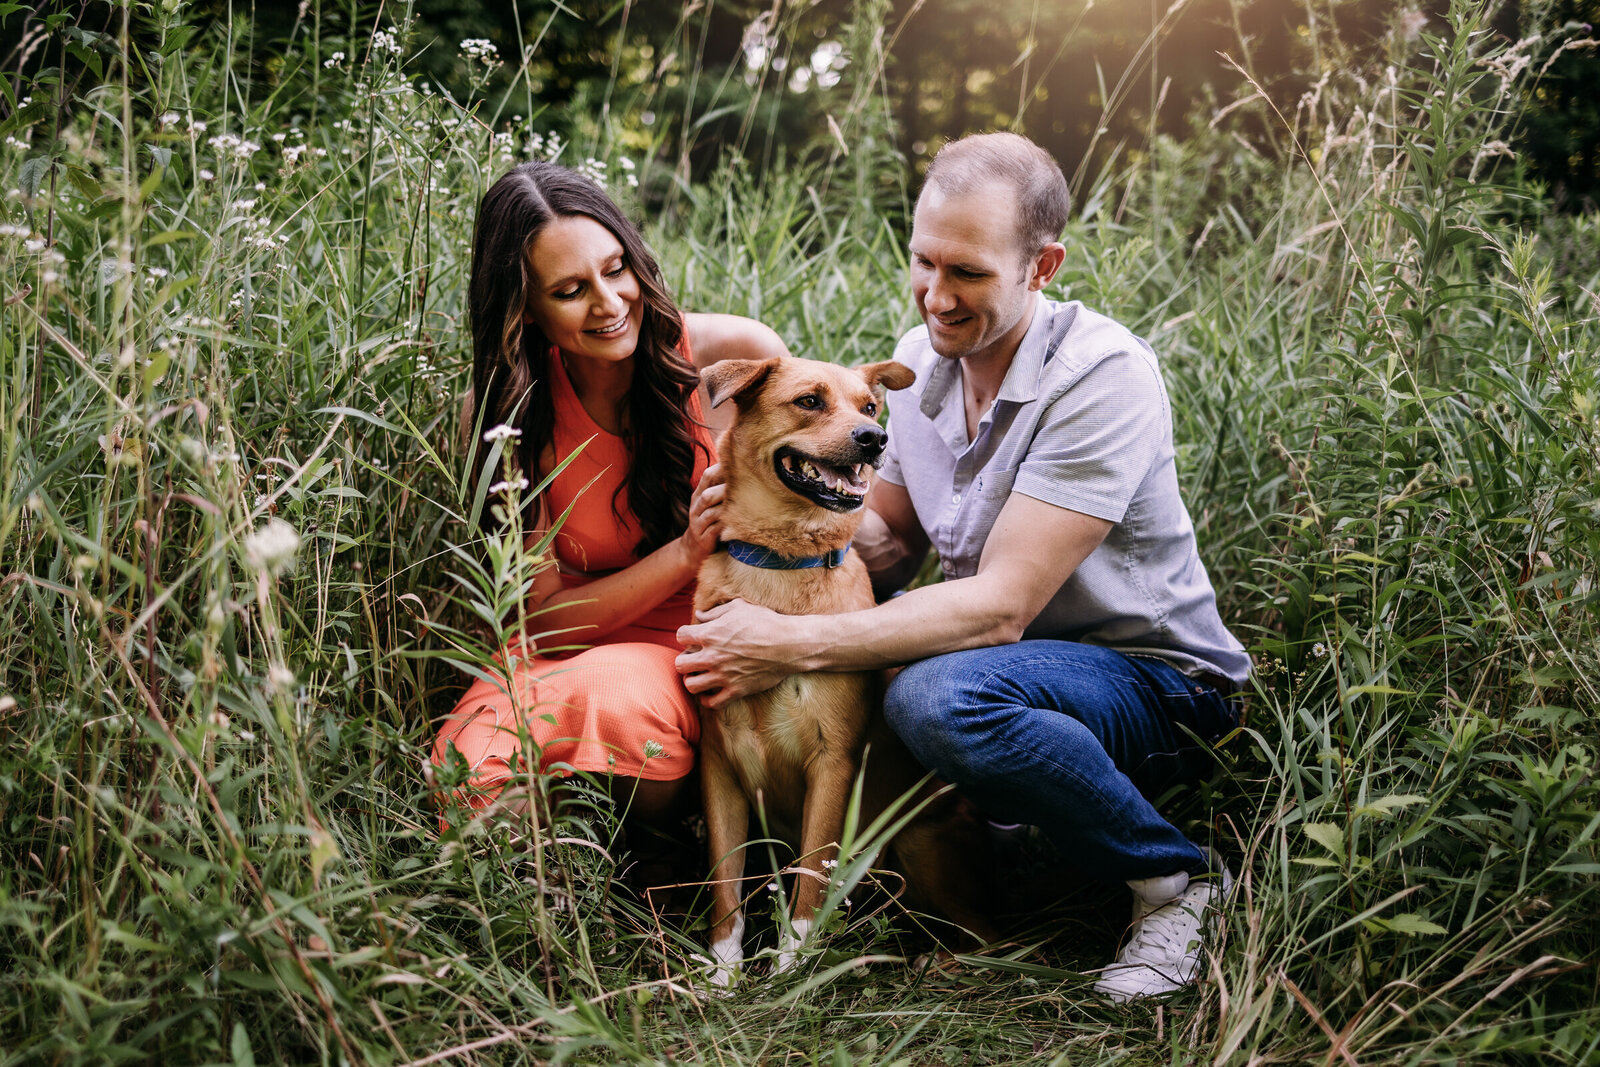 Sweet couple showing their family dog affection amongst tall grass